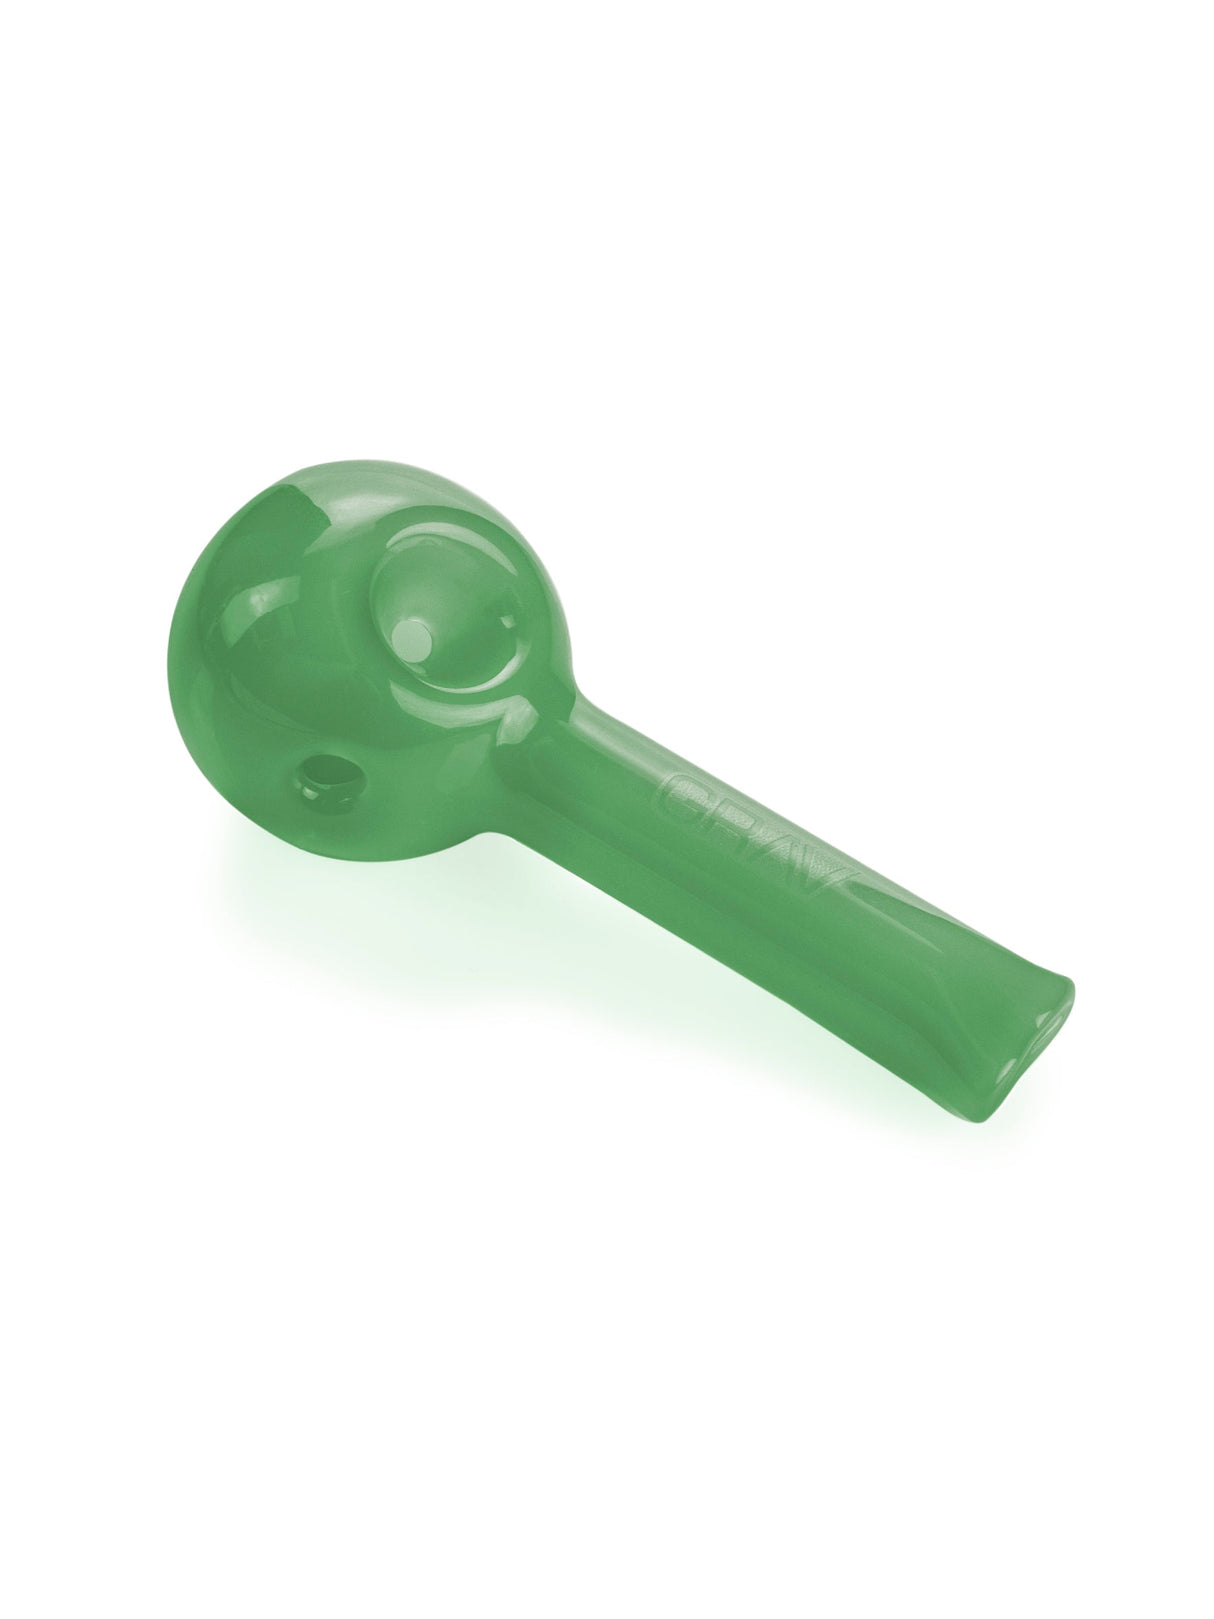 GRAV Pinch Spoon Hand Pipe in Teal - Compact Borosilicate Glass - 3.25" Length